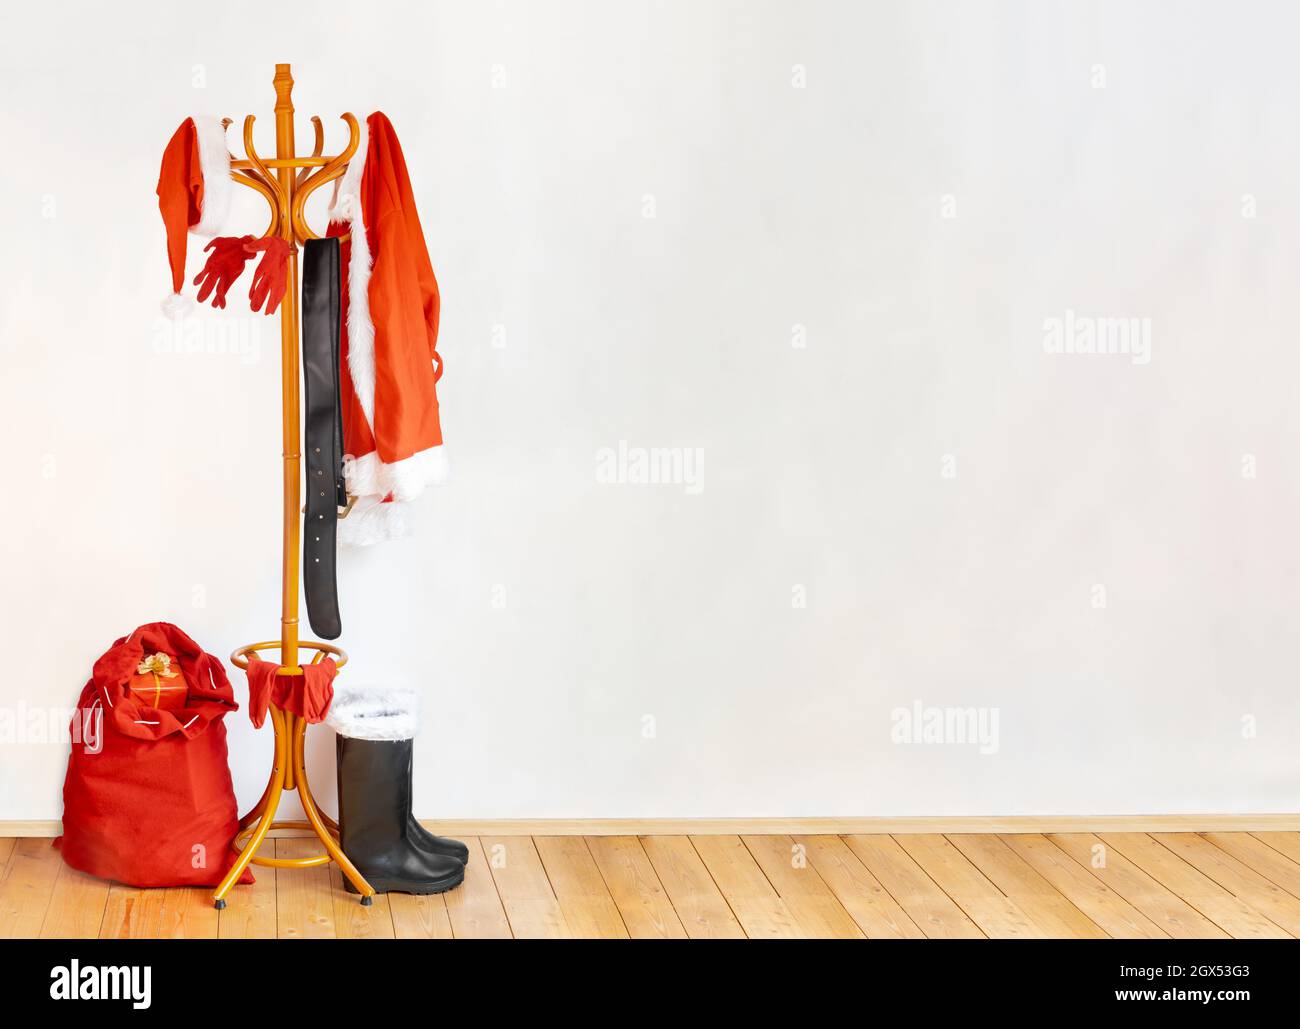 The equipment of Santa Claus hangs on the coat hook in a empty room with wooden floor. Stock Photo